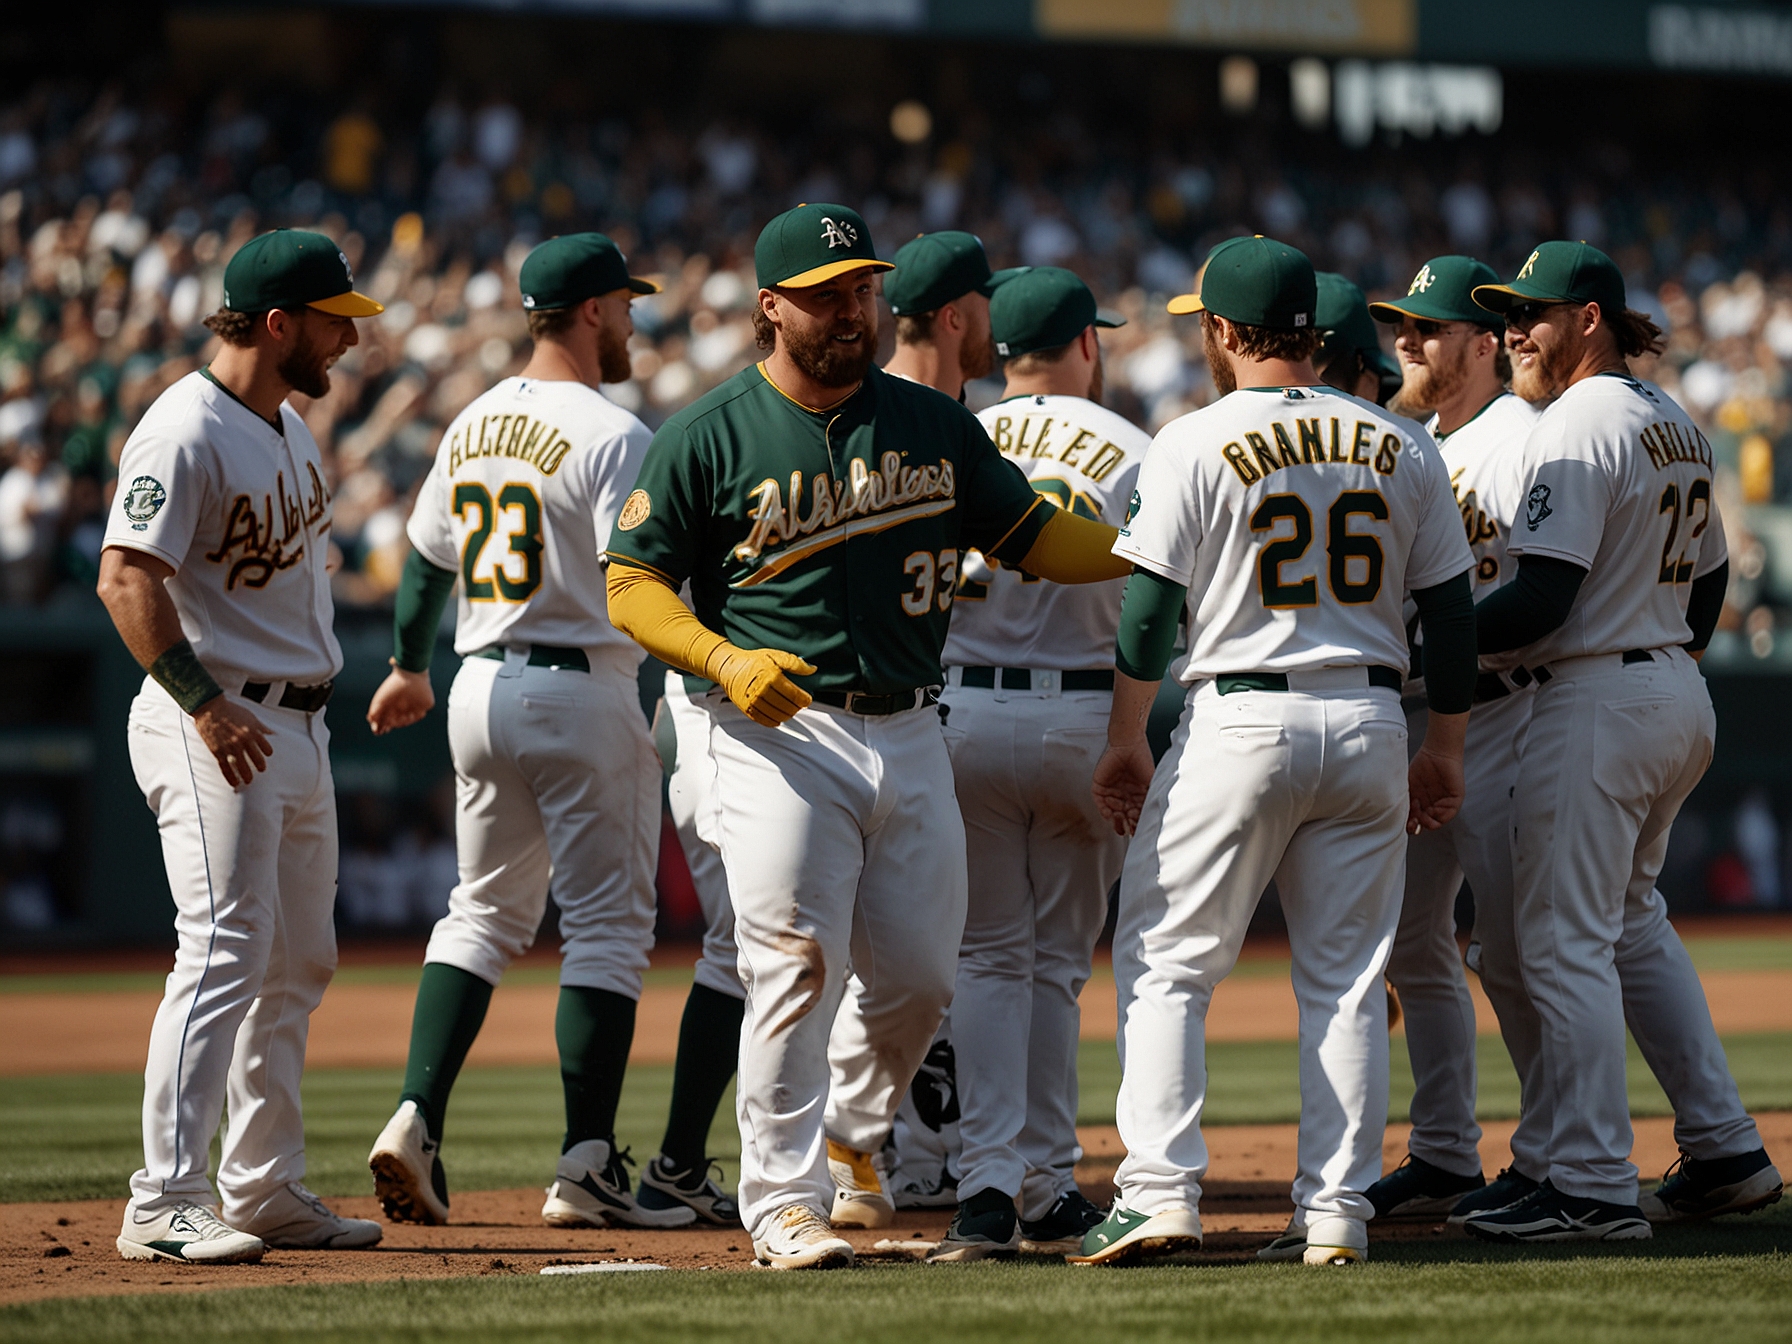 Celebratory moment as Oakland Athletics players rally together after snapping an eleven-game road losing streak, marking a significant morale boost for the struggling team.